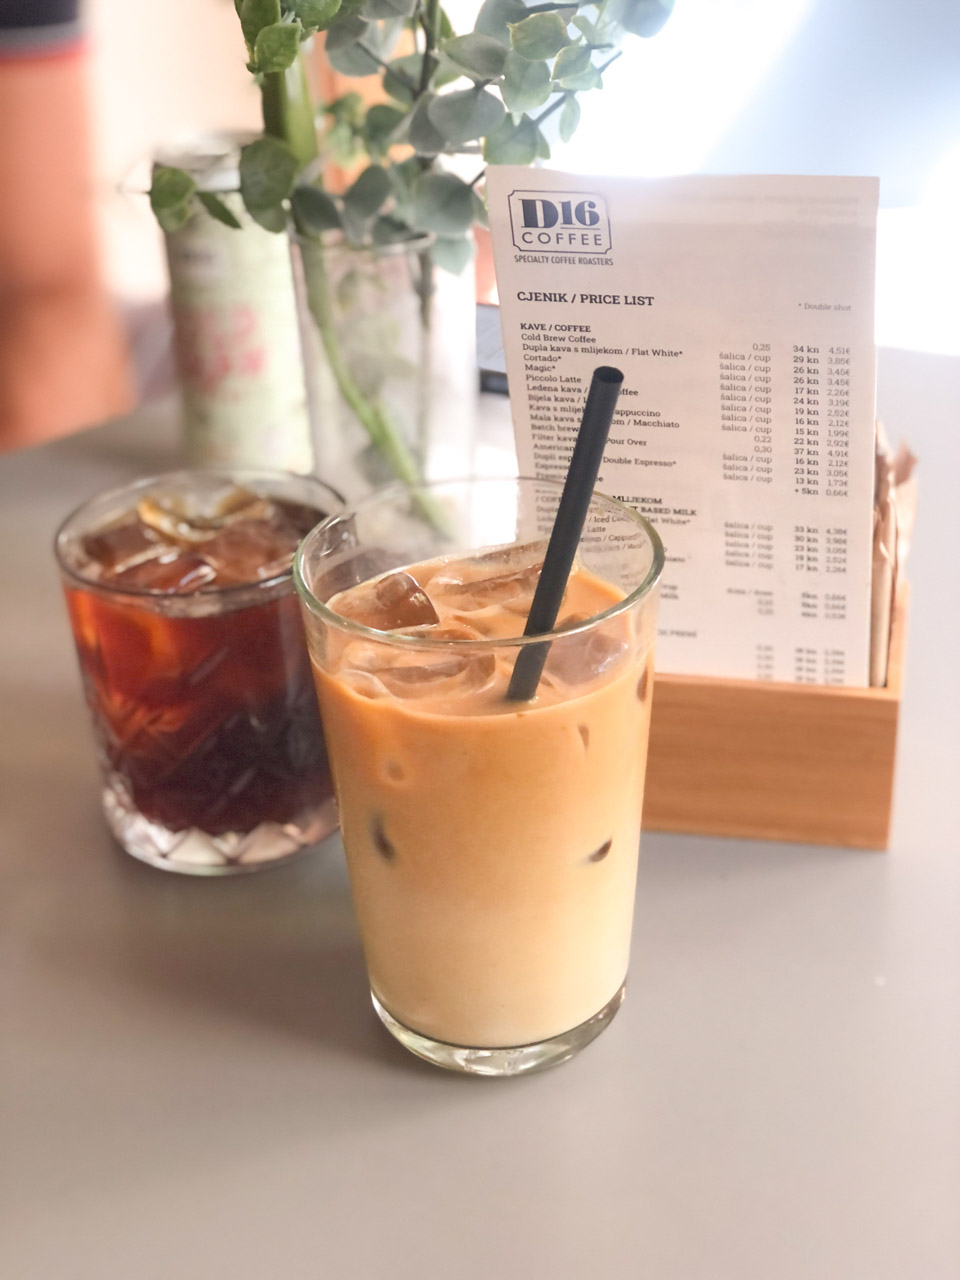 Cold brew coffee and an iced latte on a table at D16 Coffee - specialty coffee roasters in Split, Croatia